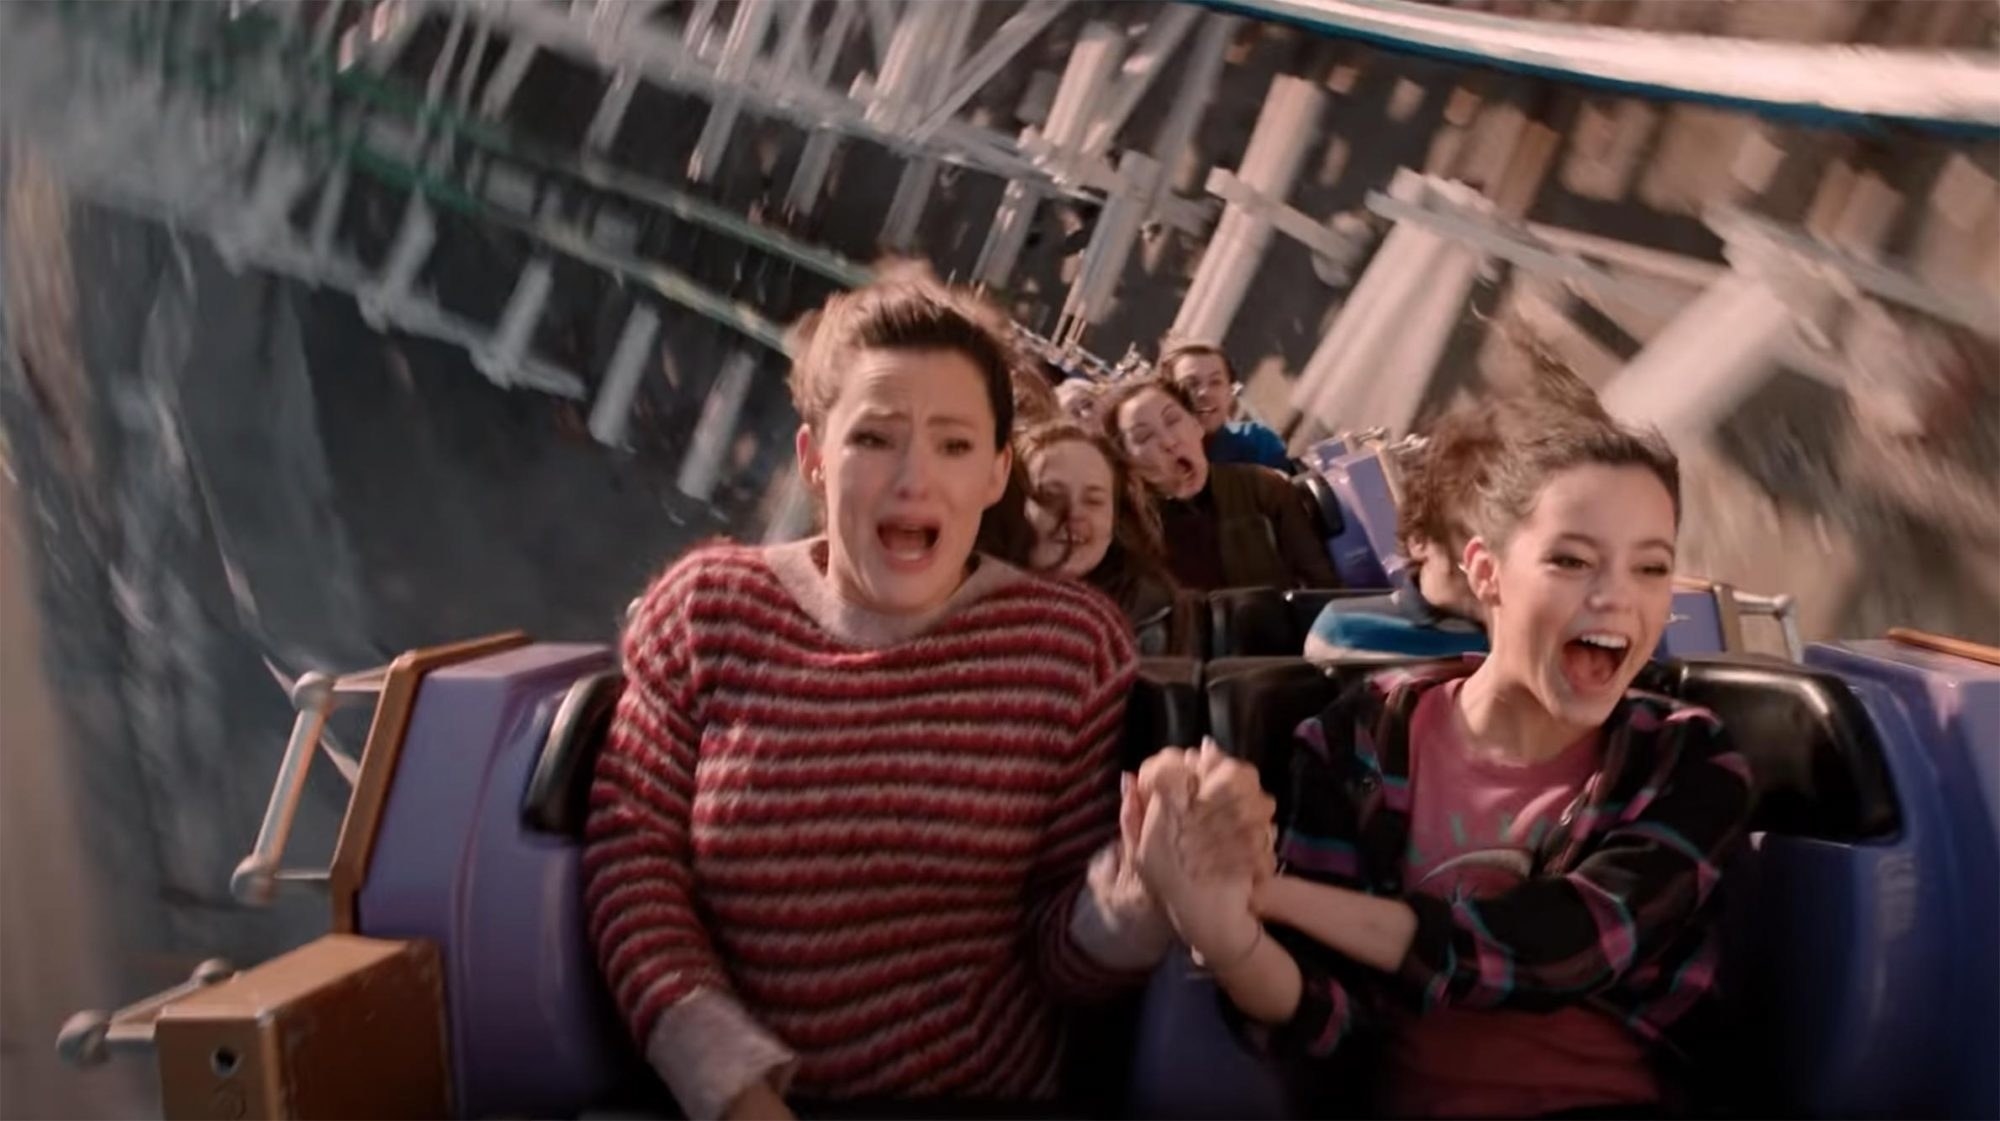 A mom and her daughter screaming while riding a roller coaster